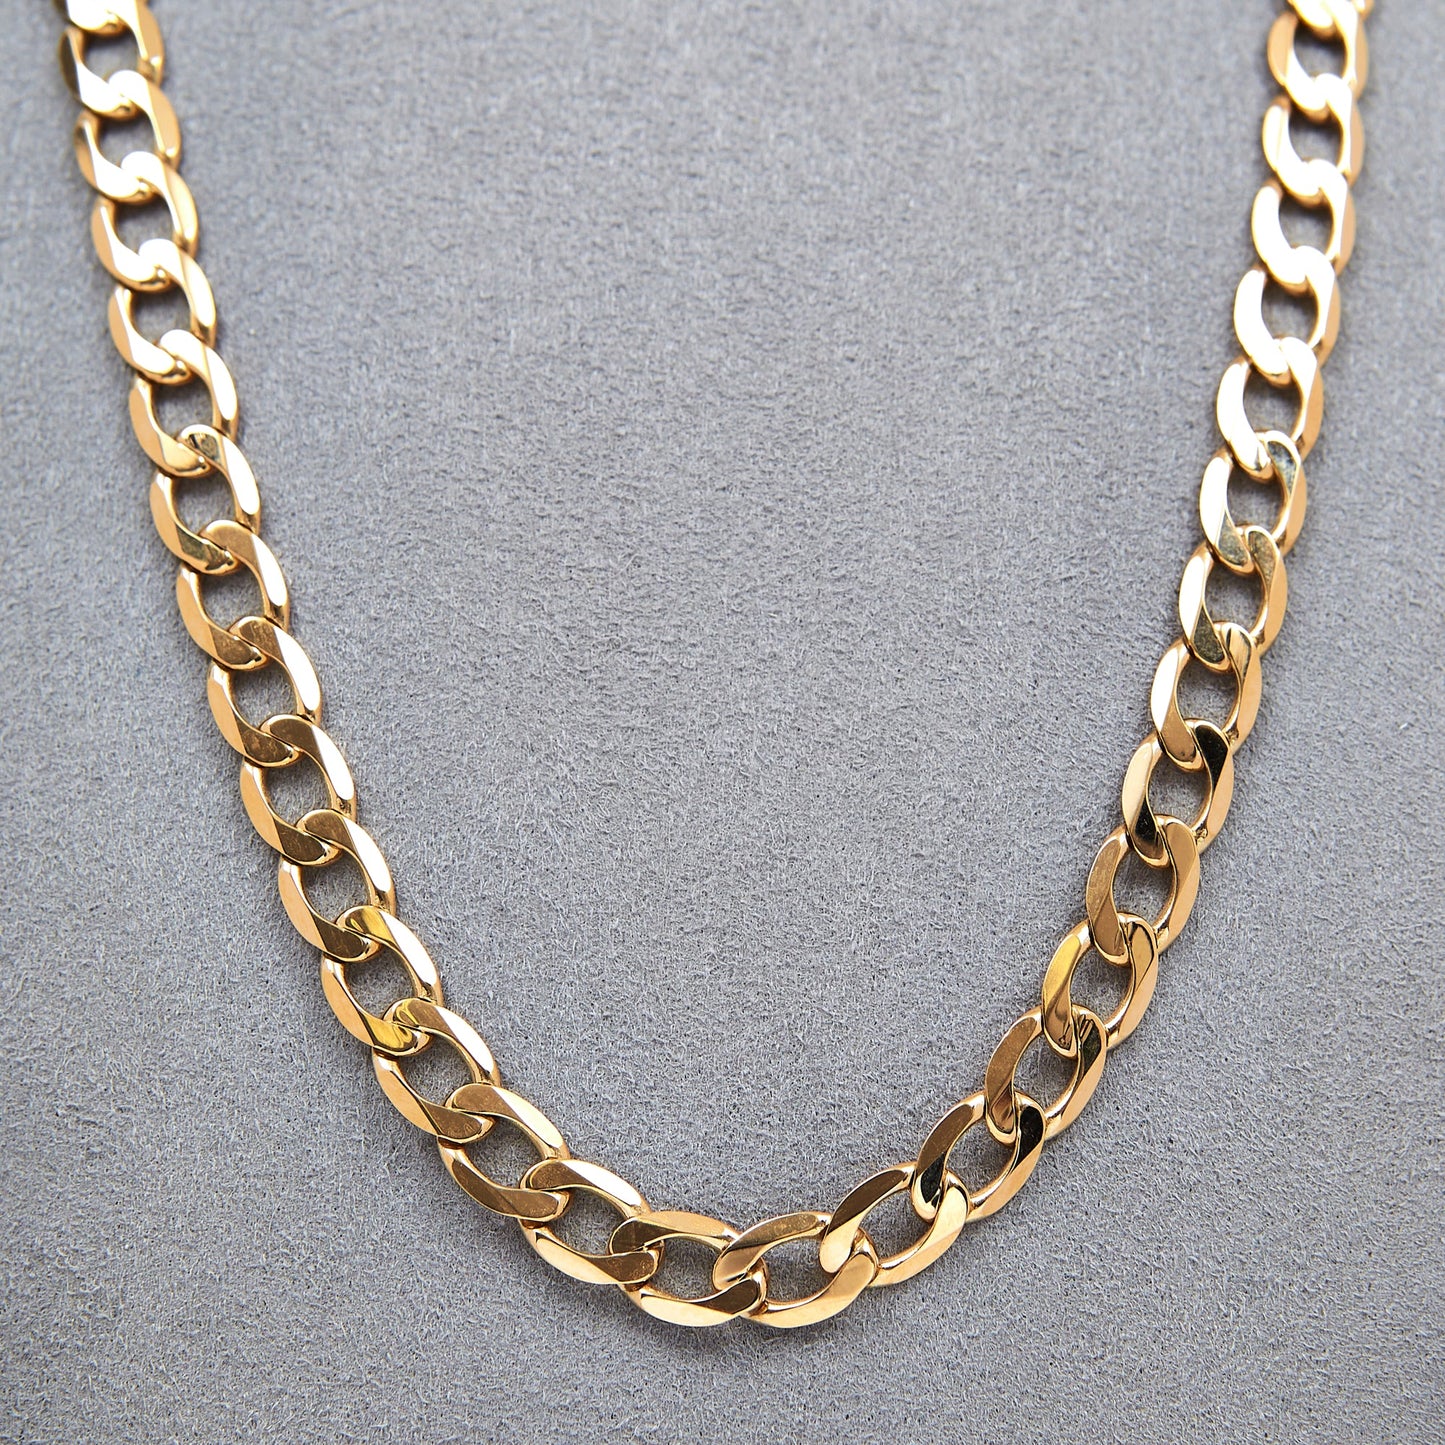 Pre-Owned 9ct Yellow Gold 20 Inch Curb Chain Link Necklace